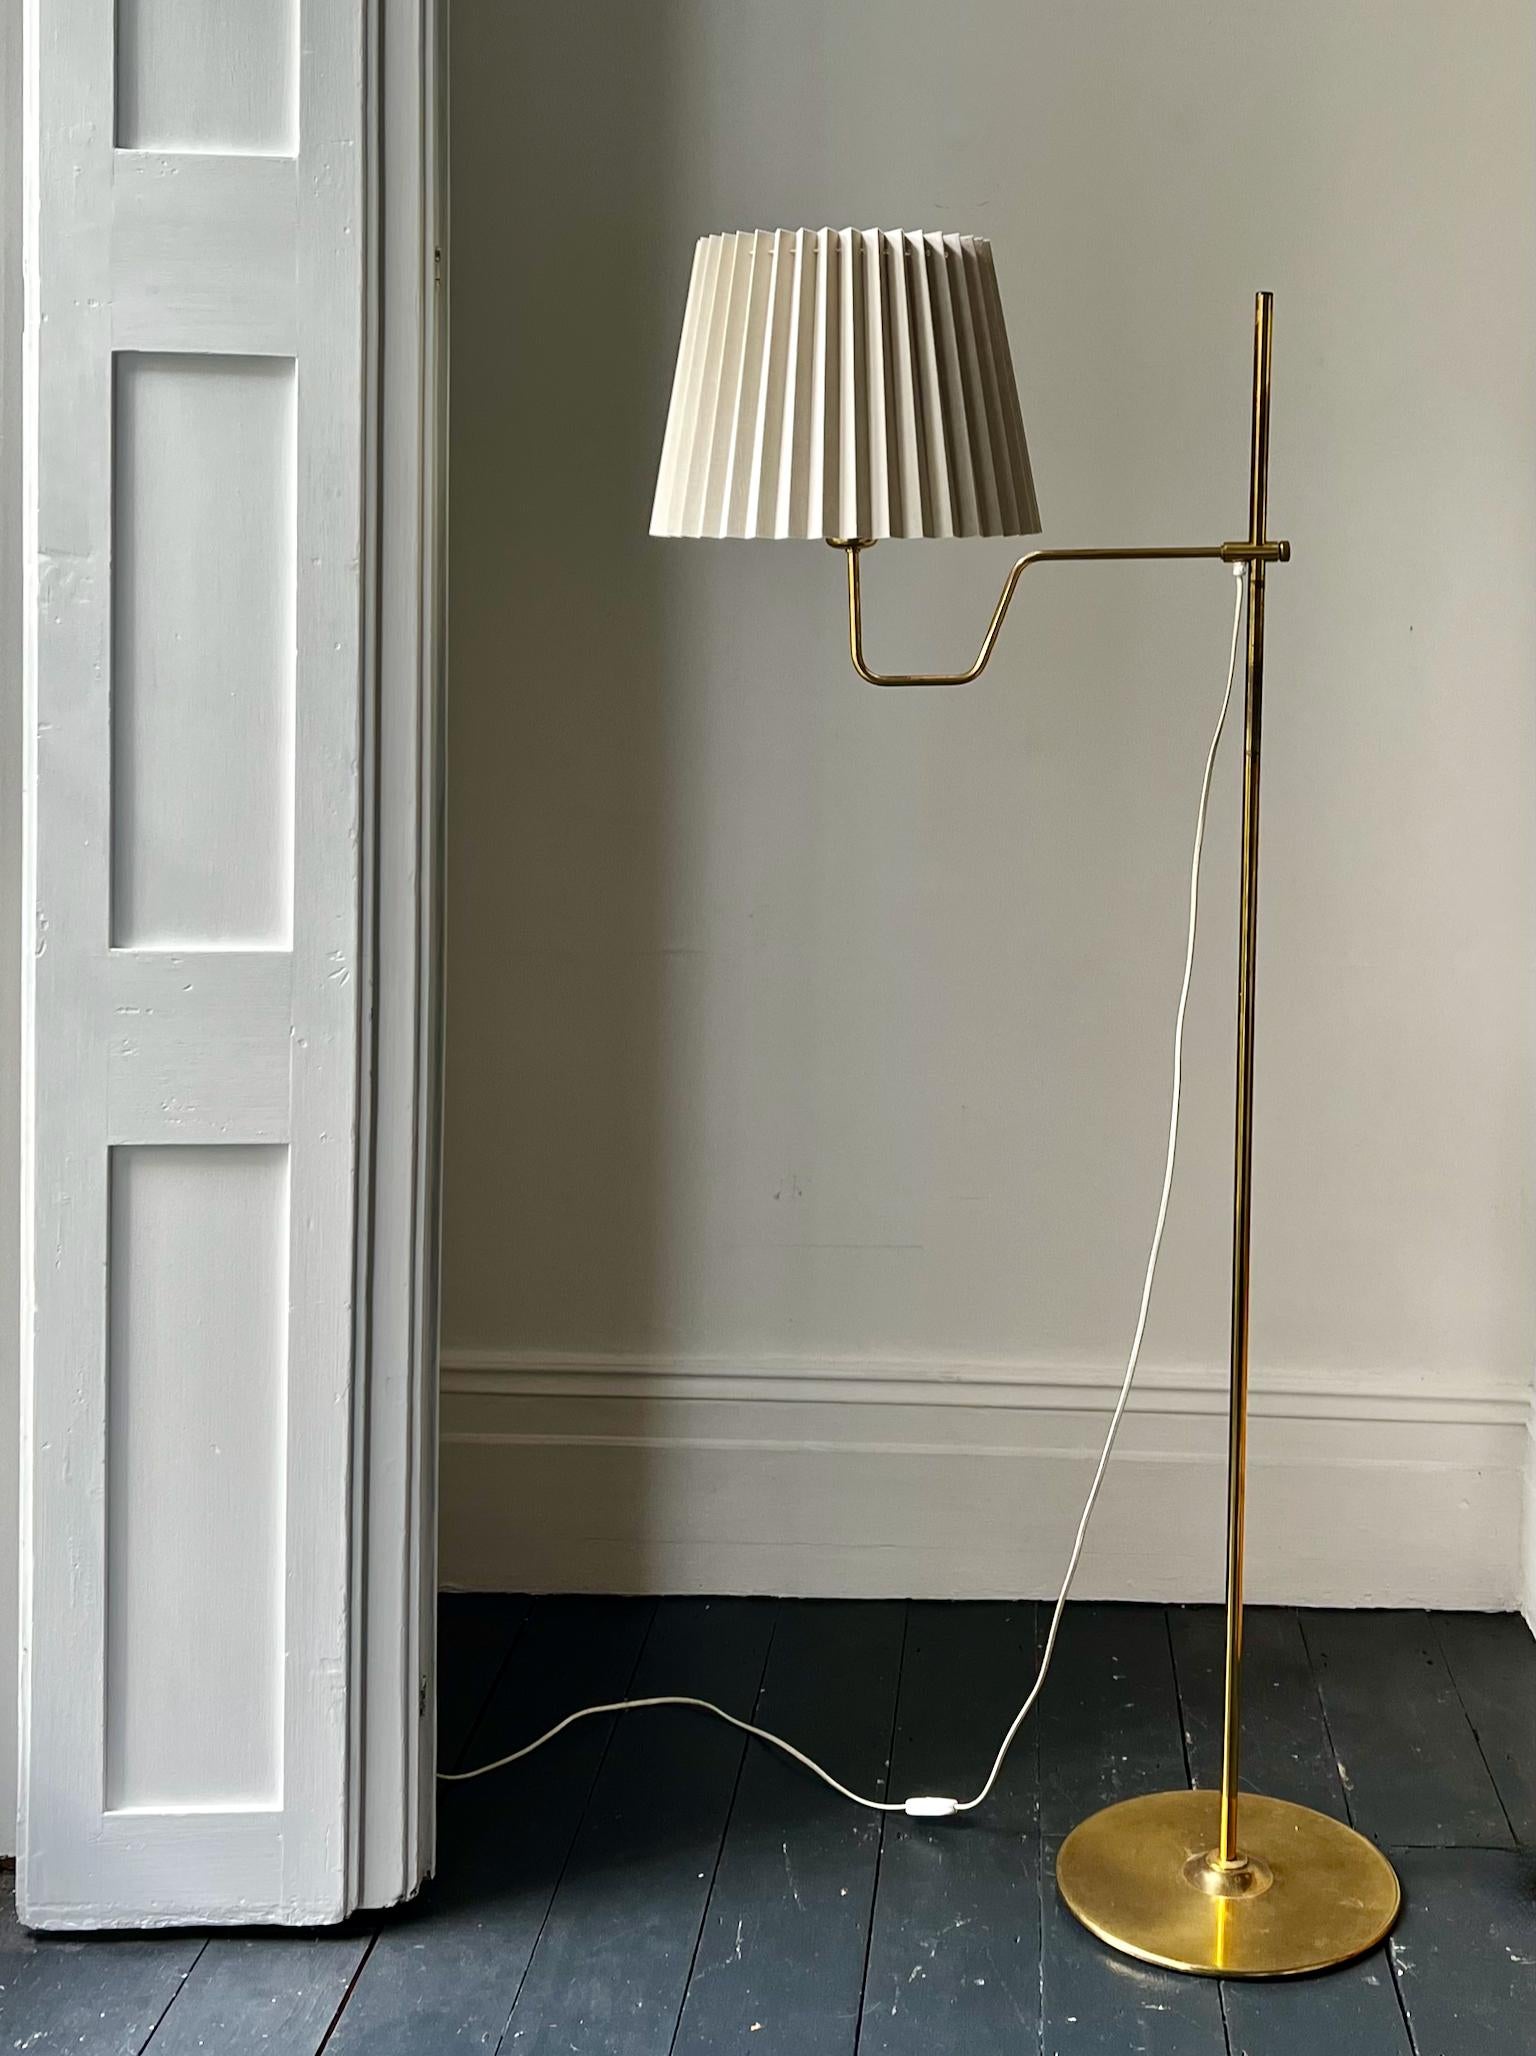 A pair of floor lamps in brass by Hans Agne Jakobsson, and made by his company in Markaryd, Sweden, mid-20th century. 

A simple design with a height-adjustable brass arm and a weighted base. The brass is in good vintage condition with